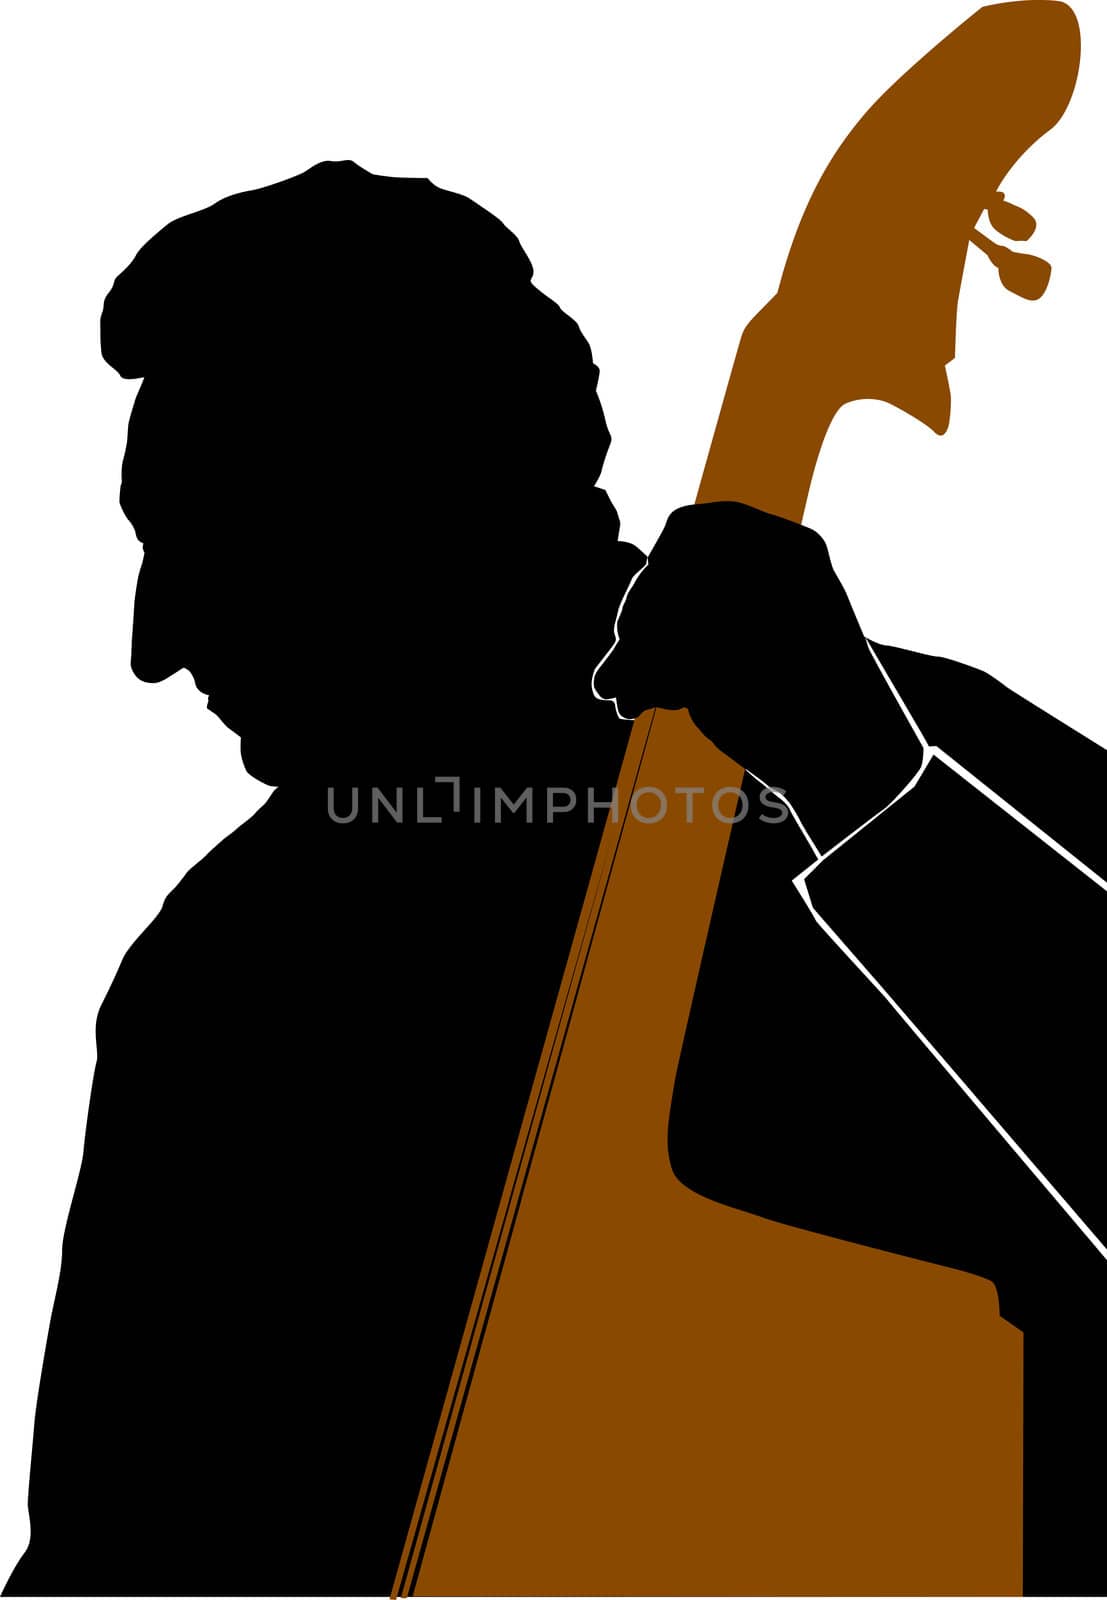 Man playing Double Bass or Contrabass by ints